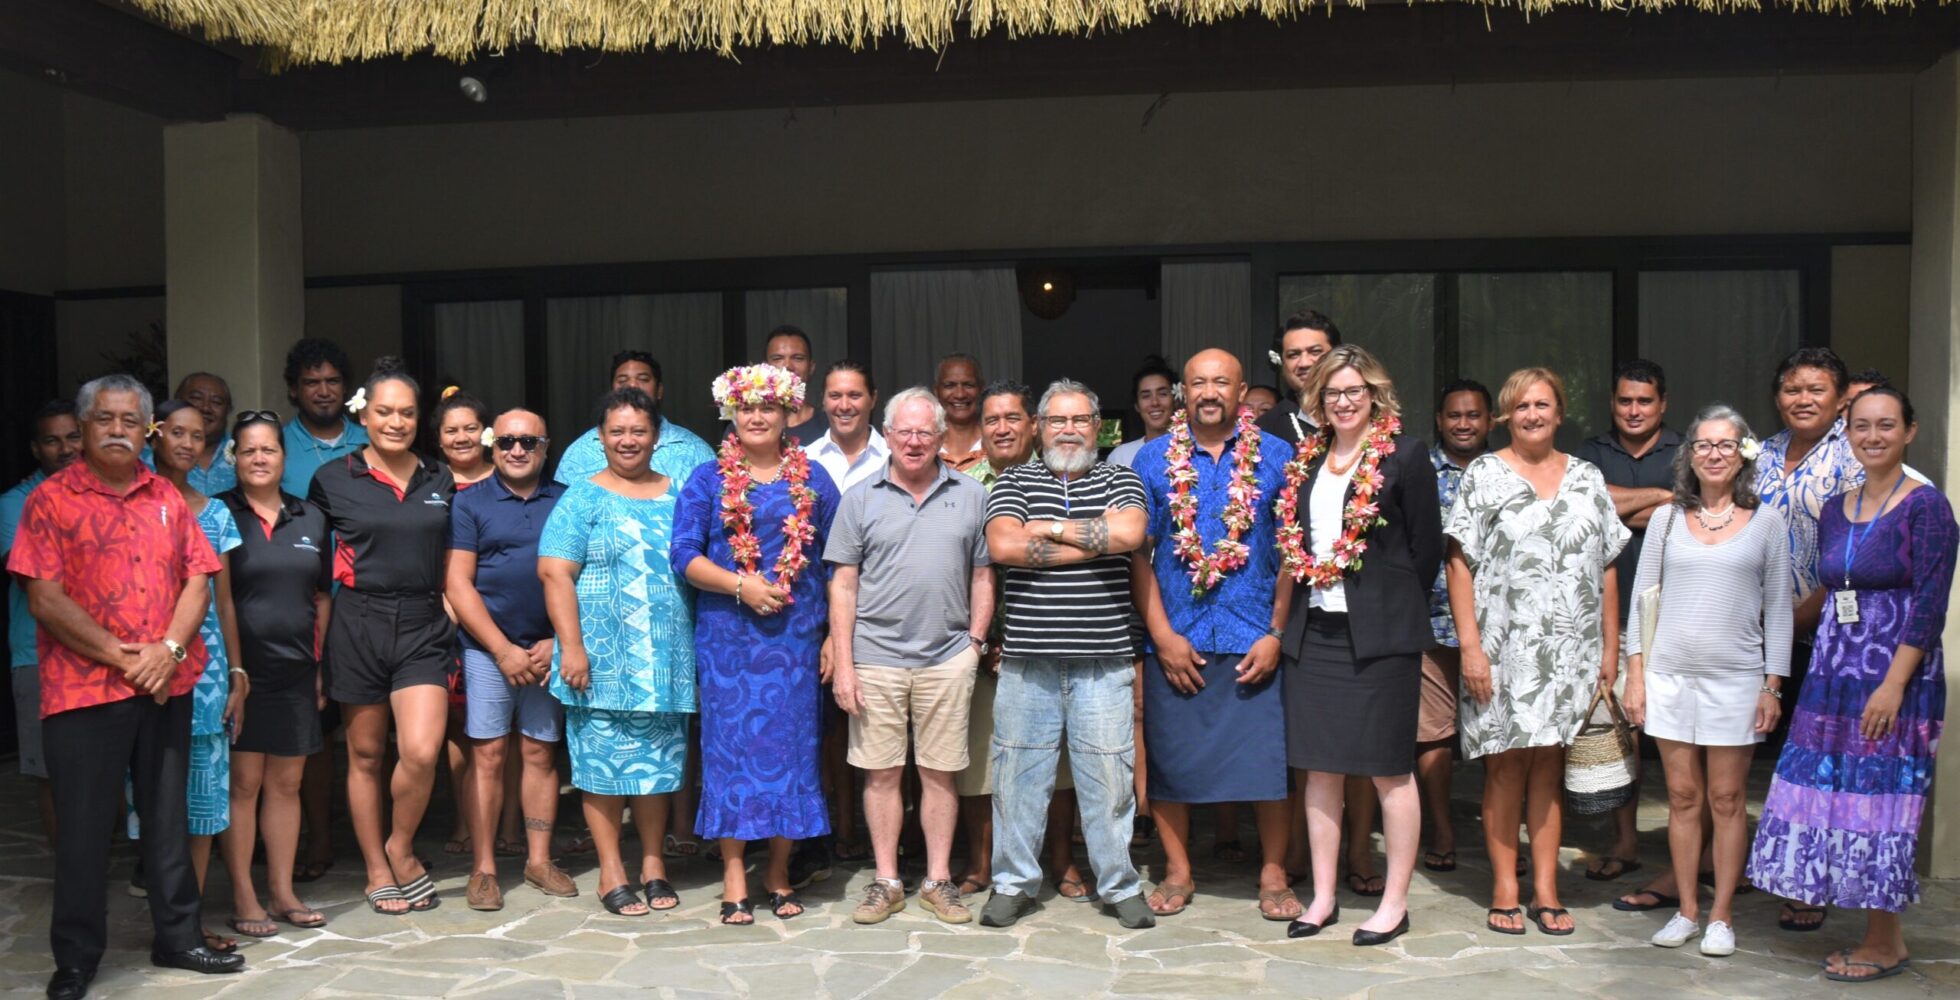 PARTNERSHIP A TRADE BOOST FOR THE COOK ISLANDS